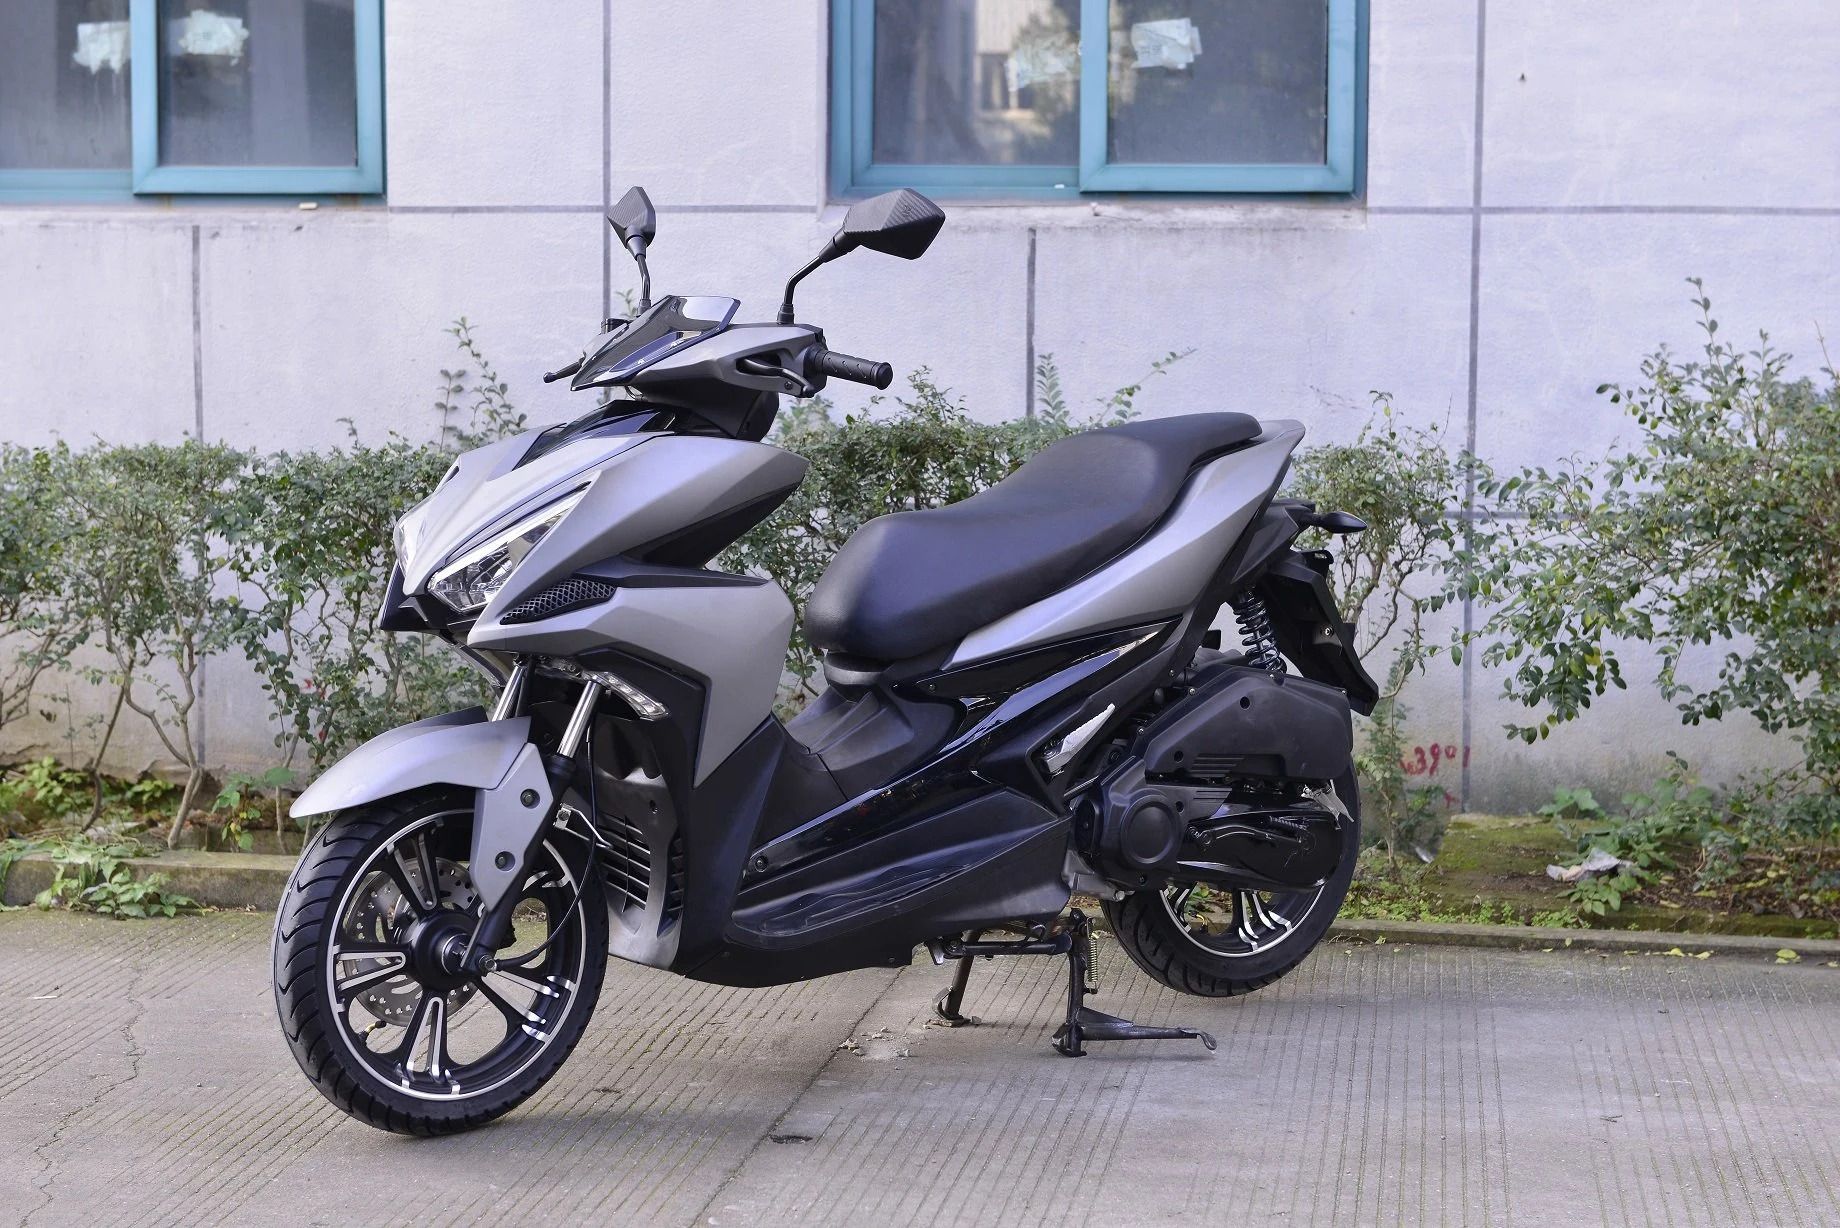 Yamaha Aerox 155 Review An Enthusiasts Guide to the Perfect Scooter